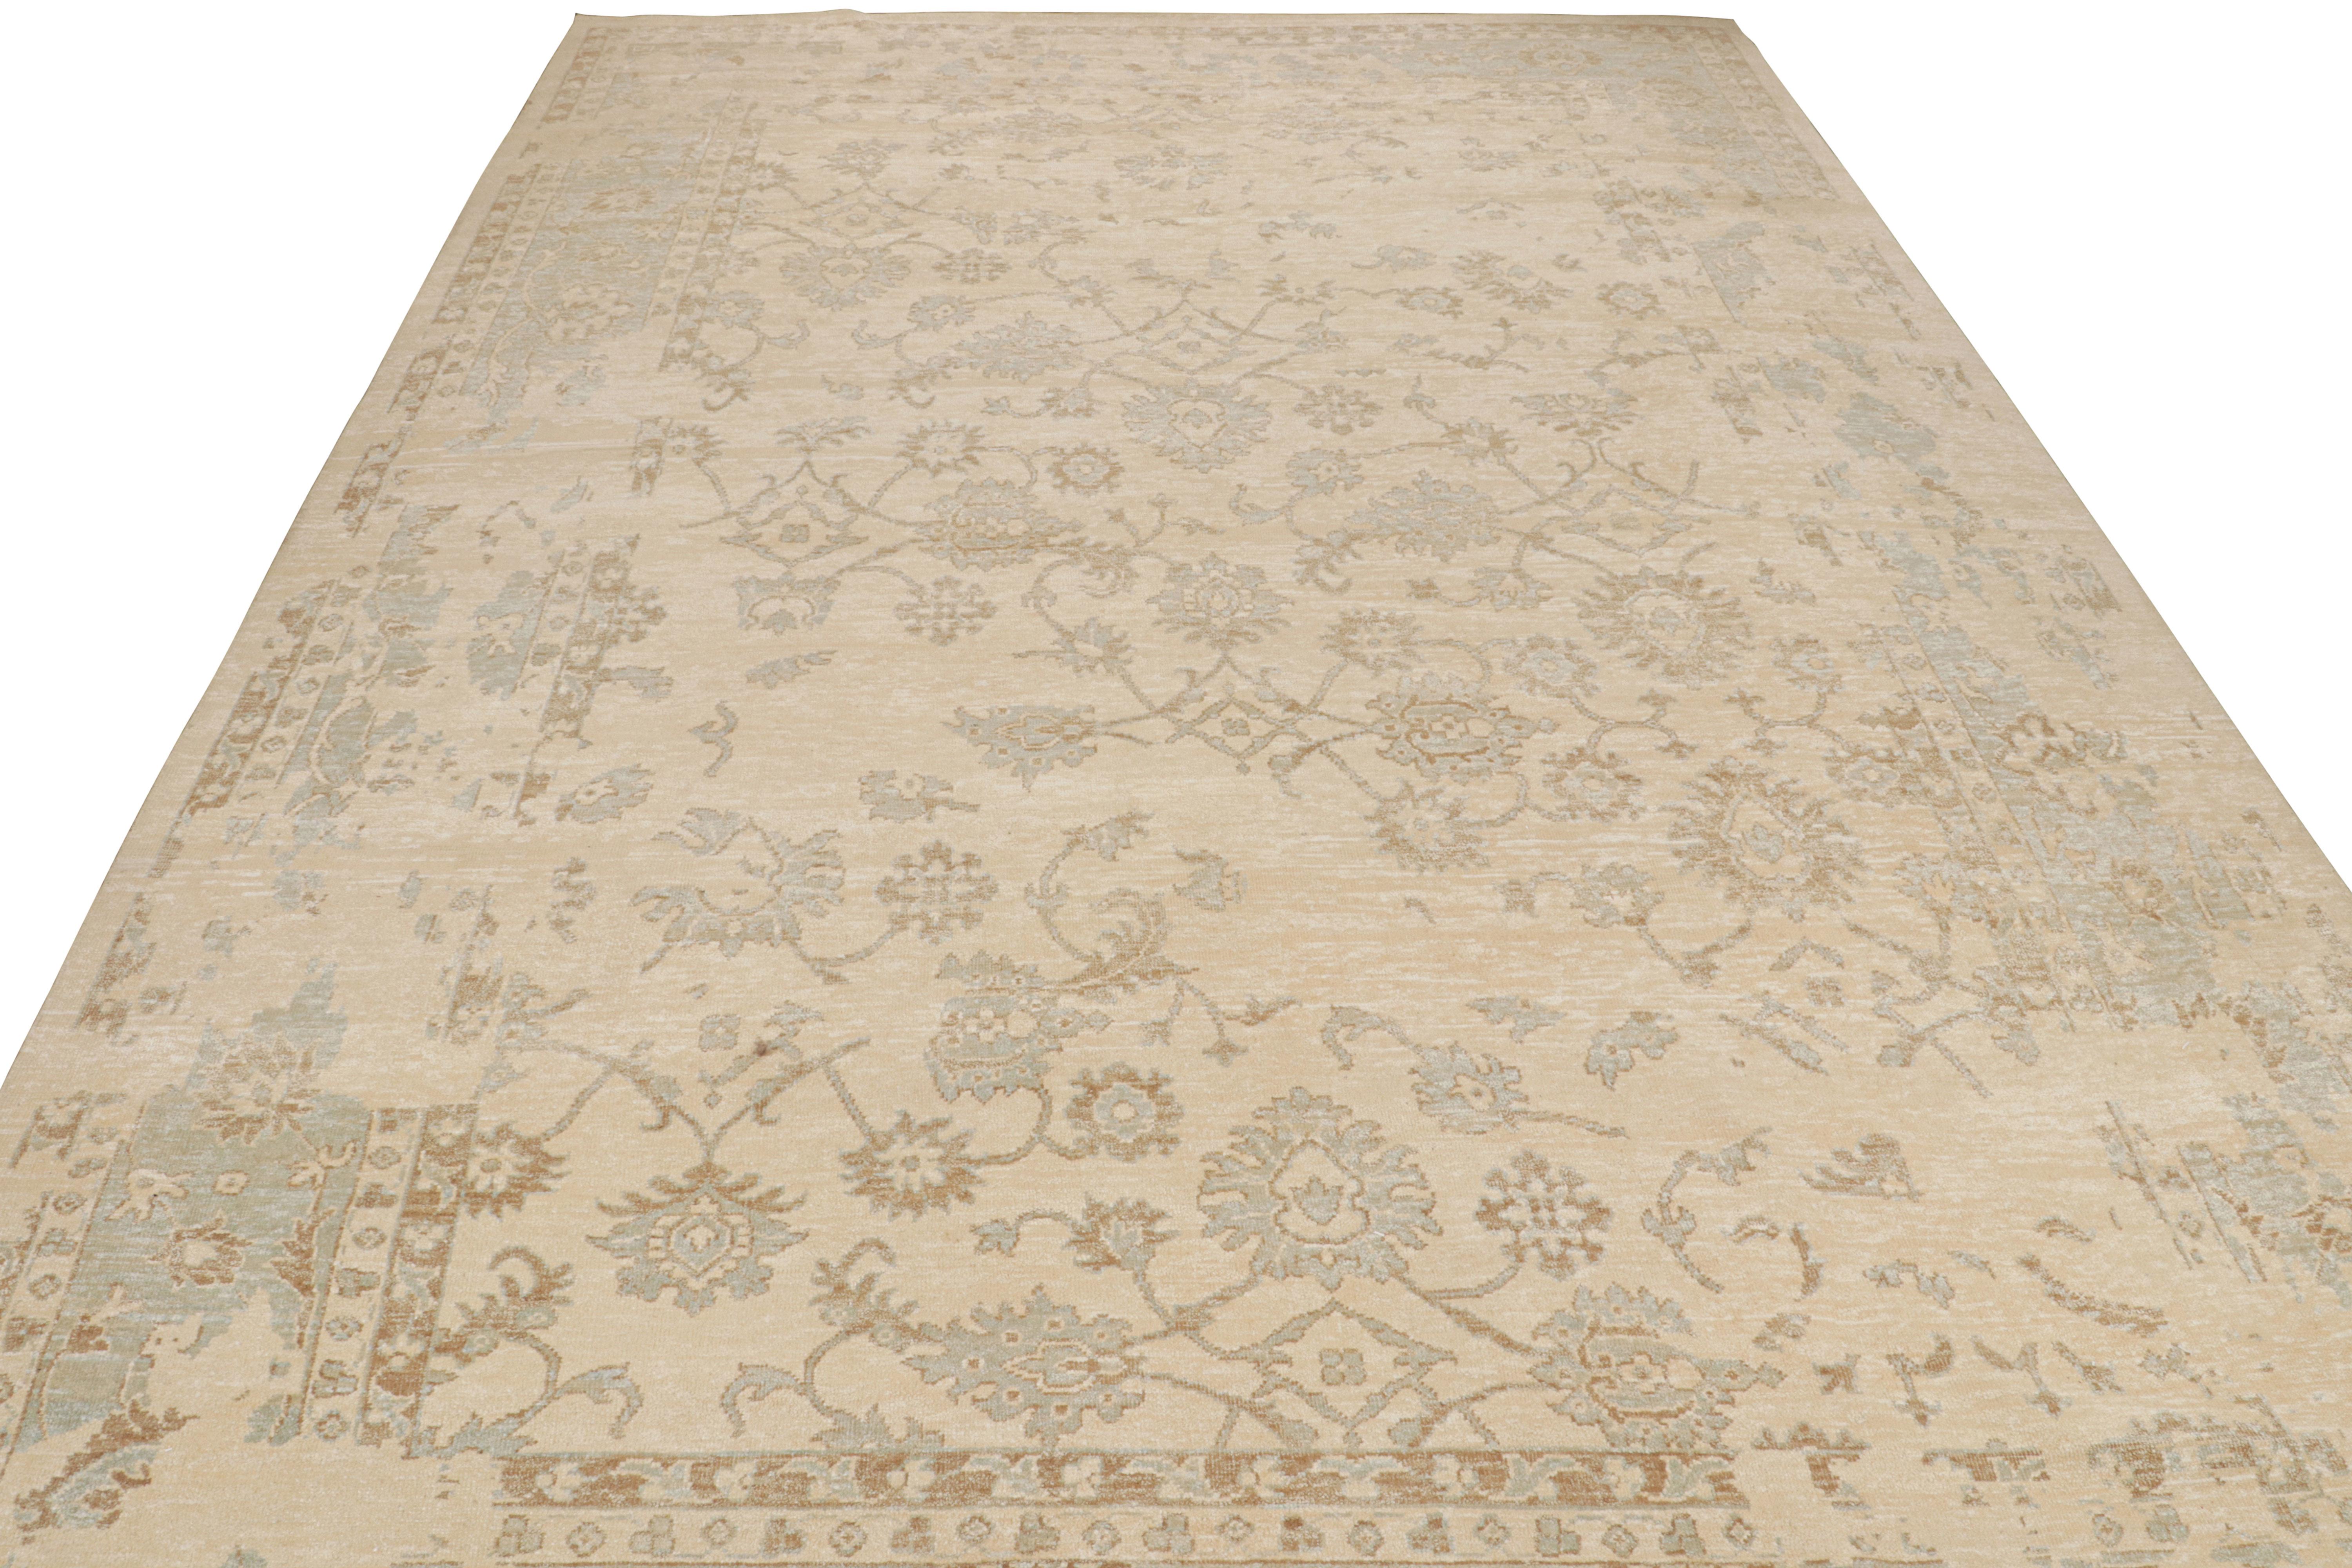 Indian Rug & Kilim’s Oushak Style Oversized Rug in Beige/Brown, With Floral Patterns For Sale